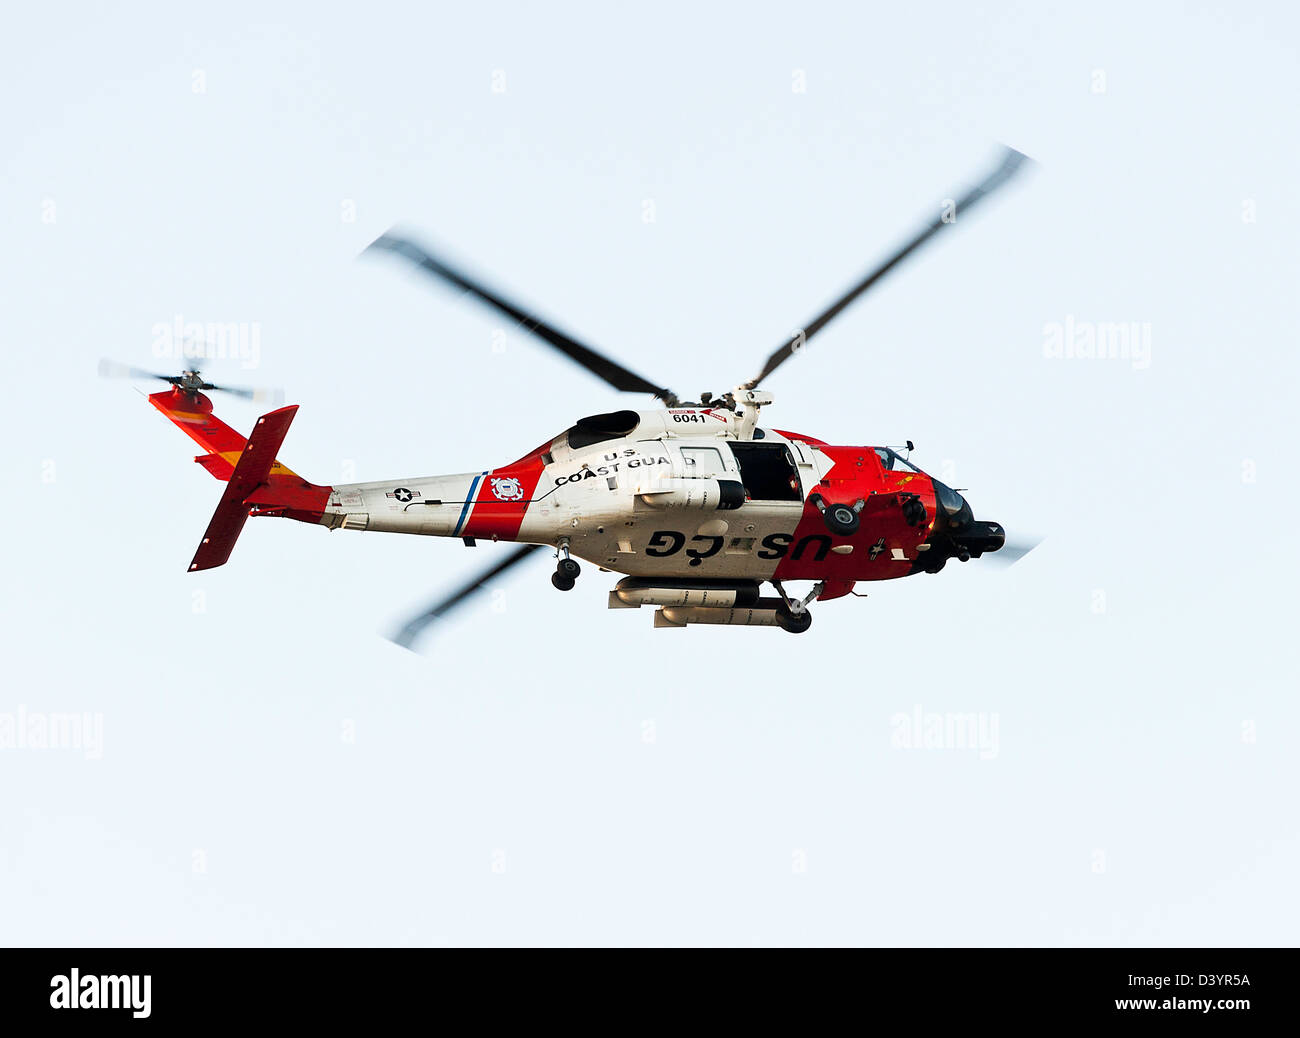 US Coast Guard Sikorsky HH-60J Helicopter 6041 on Patrol Over San Diego California United States America USA Stock Photo